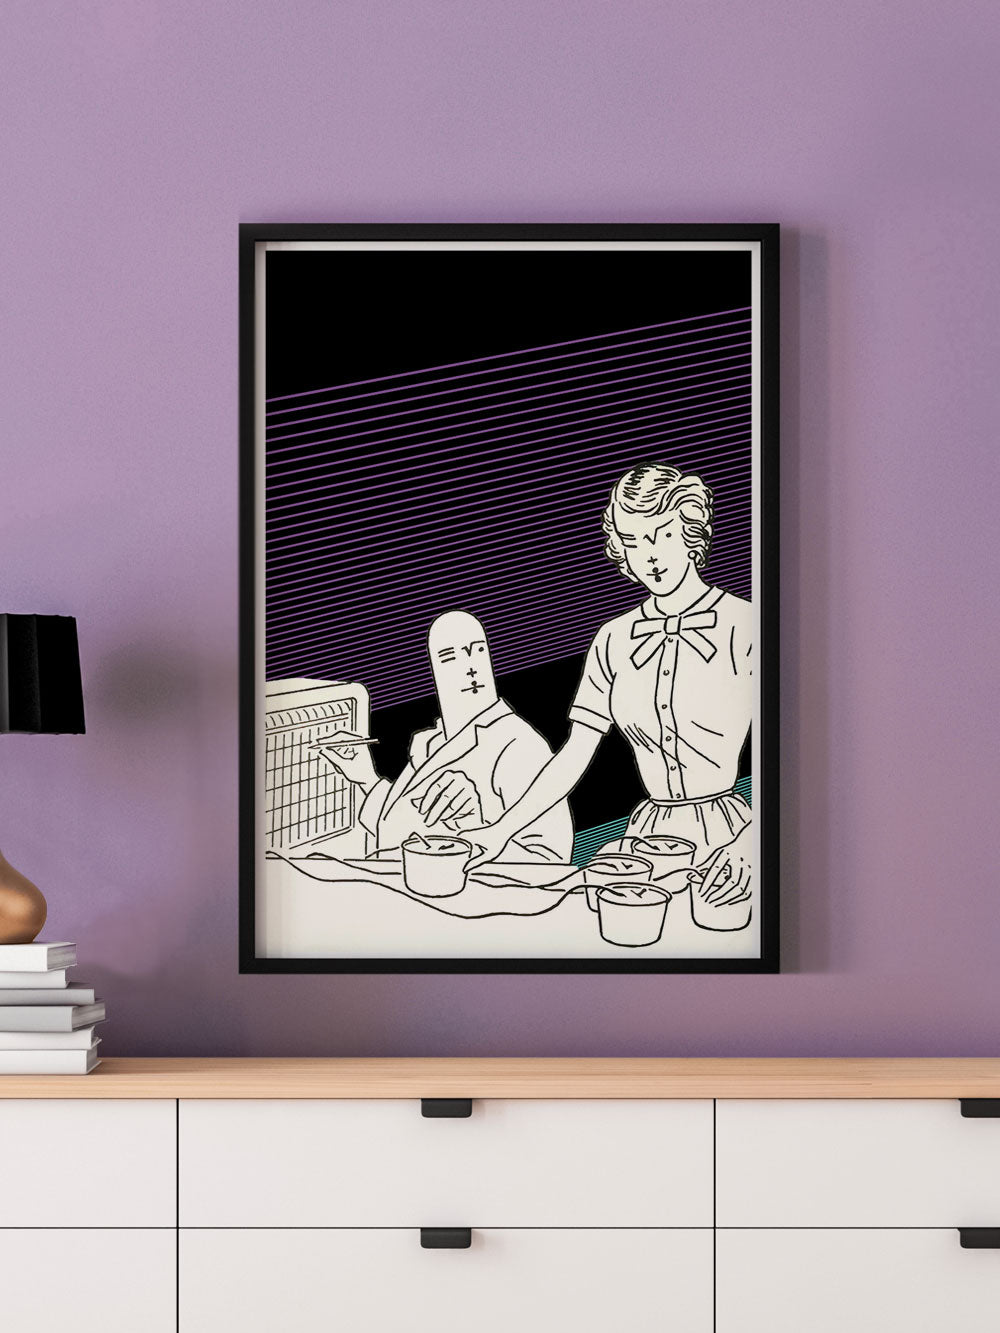 Linear Frequency Illustration Print in a frame on a wall